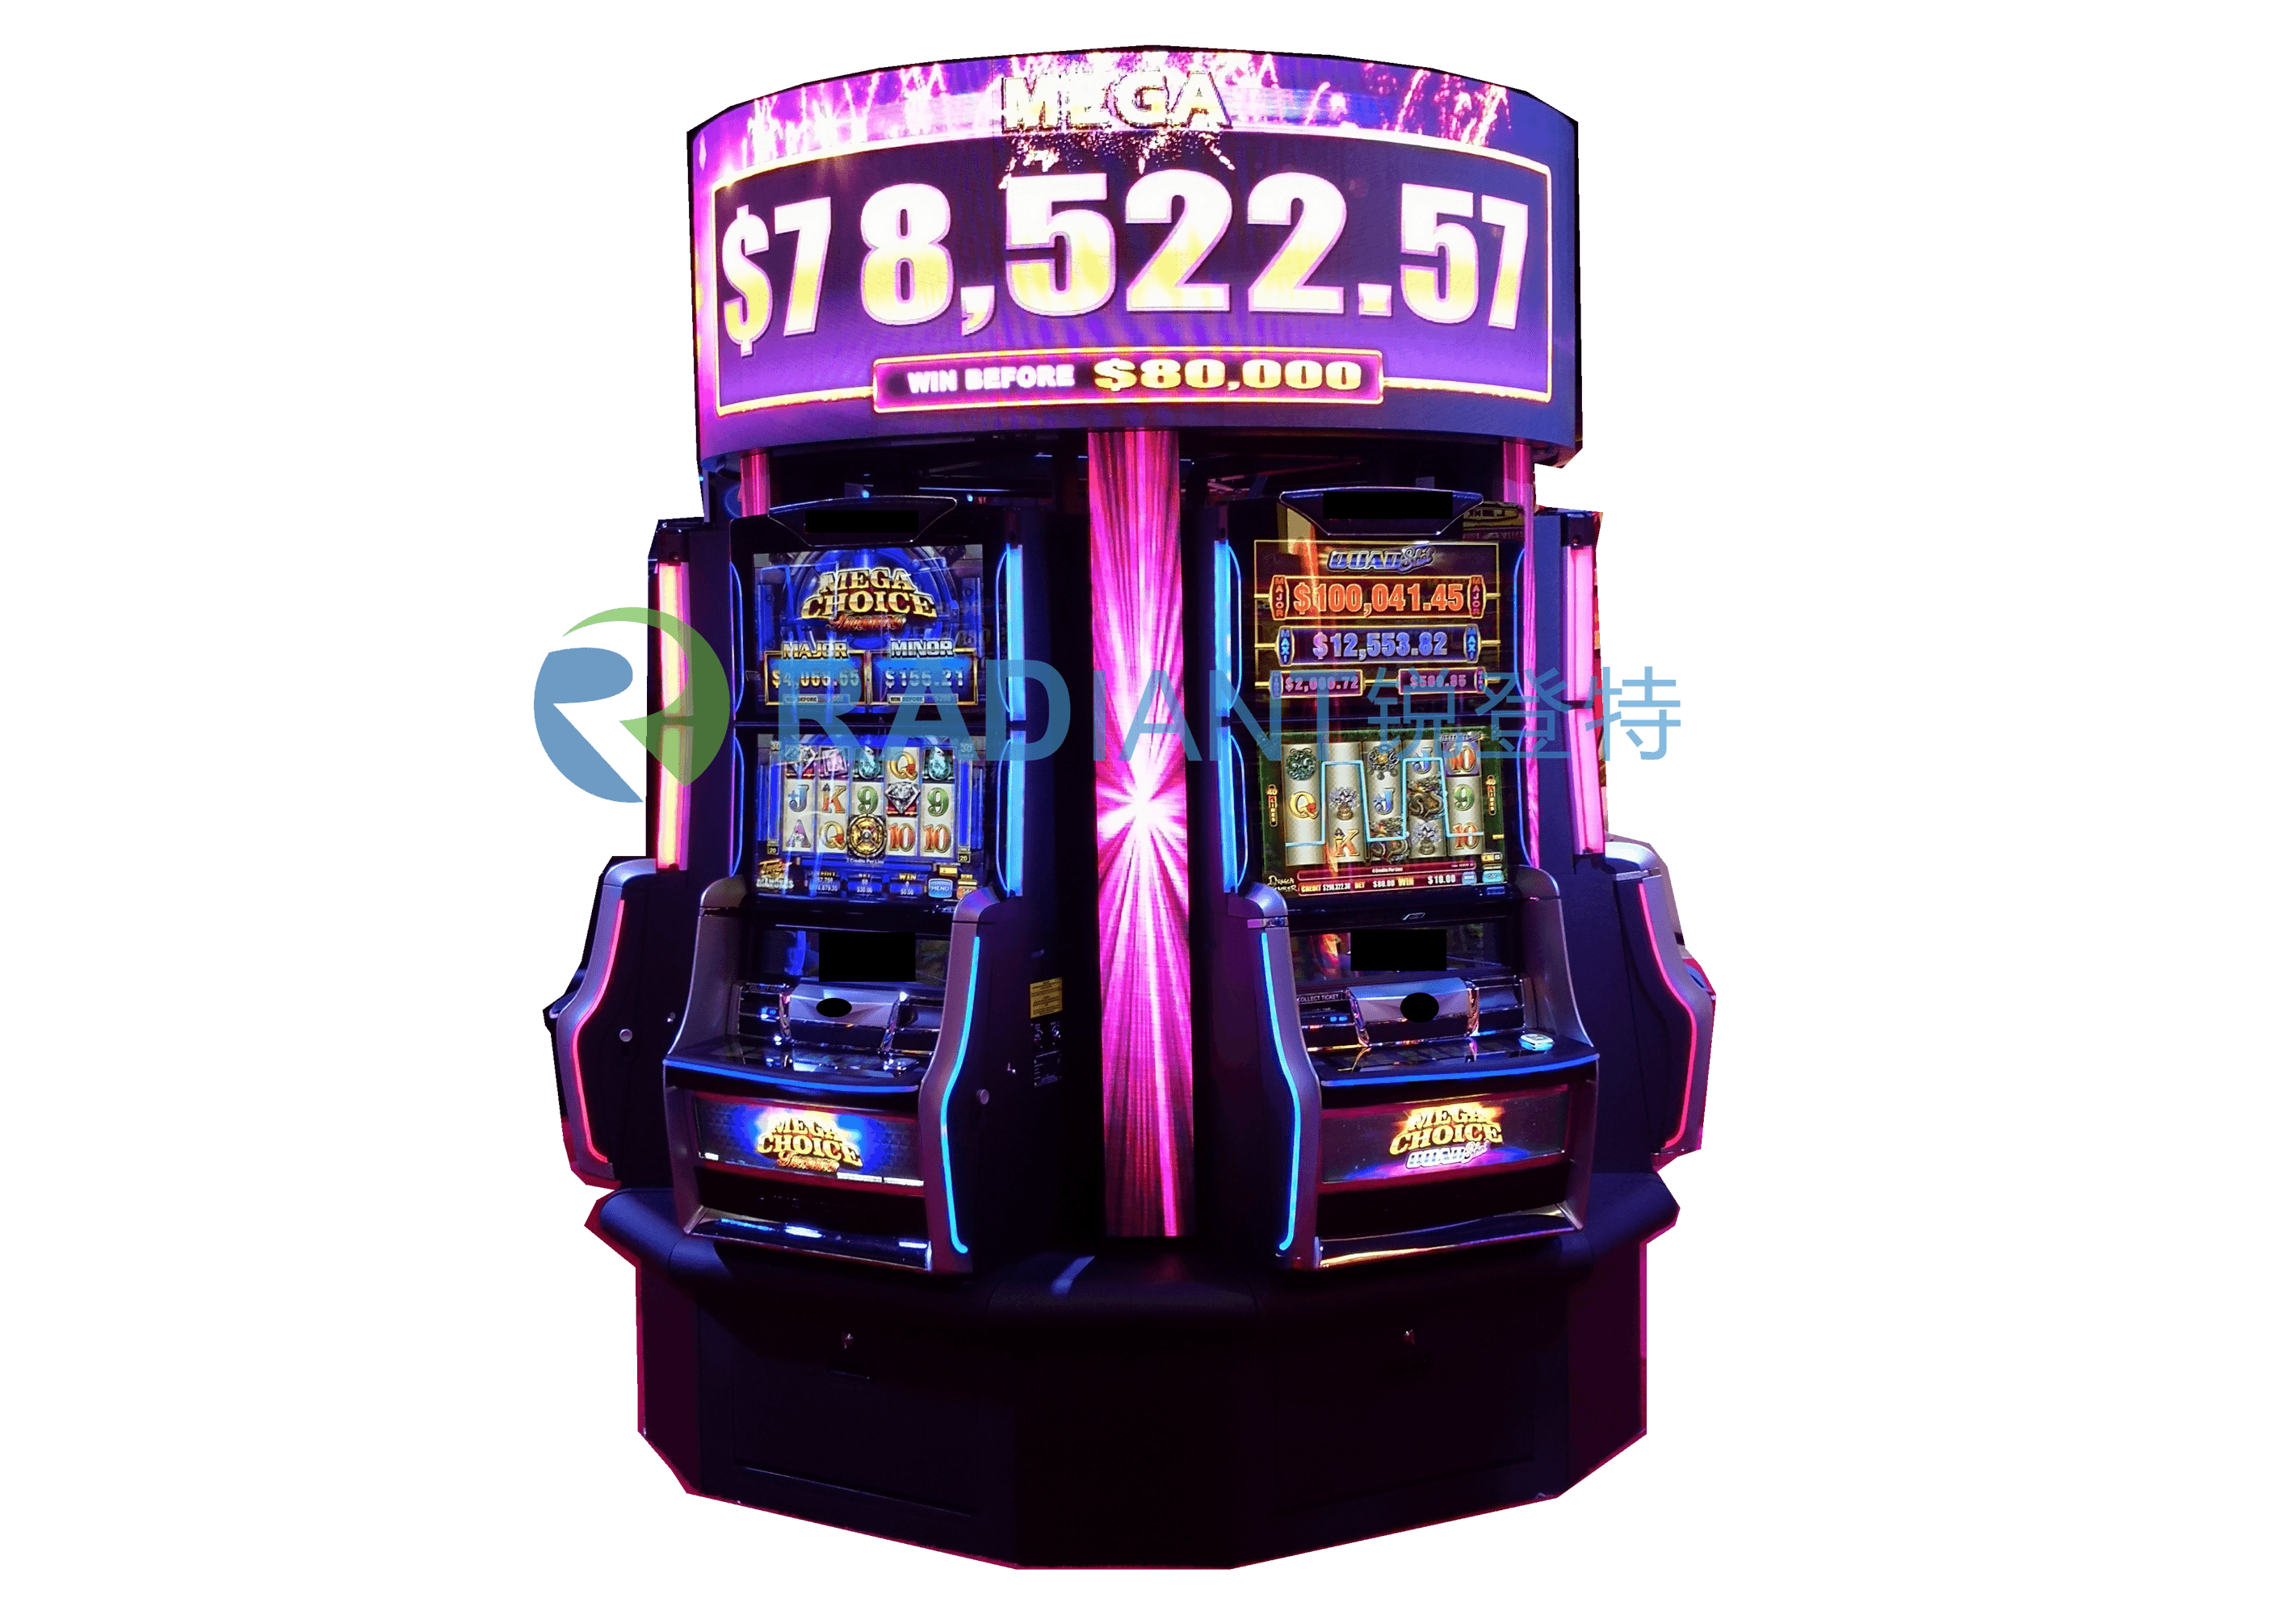 Round LED Display for Slot Machine circle screen for Entertaining gaming experiences Featured Image